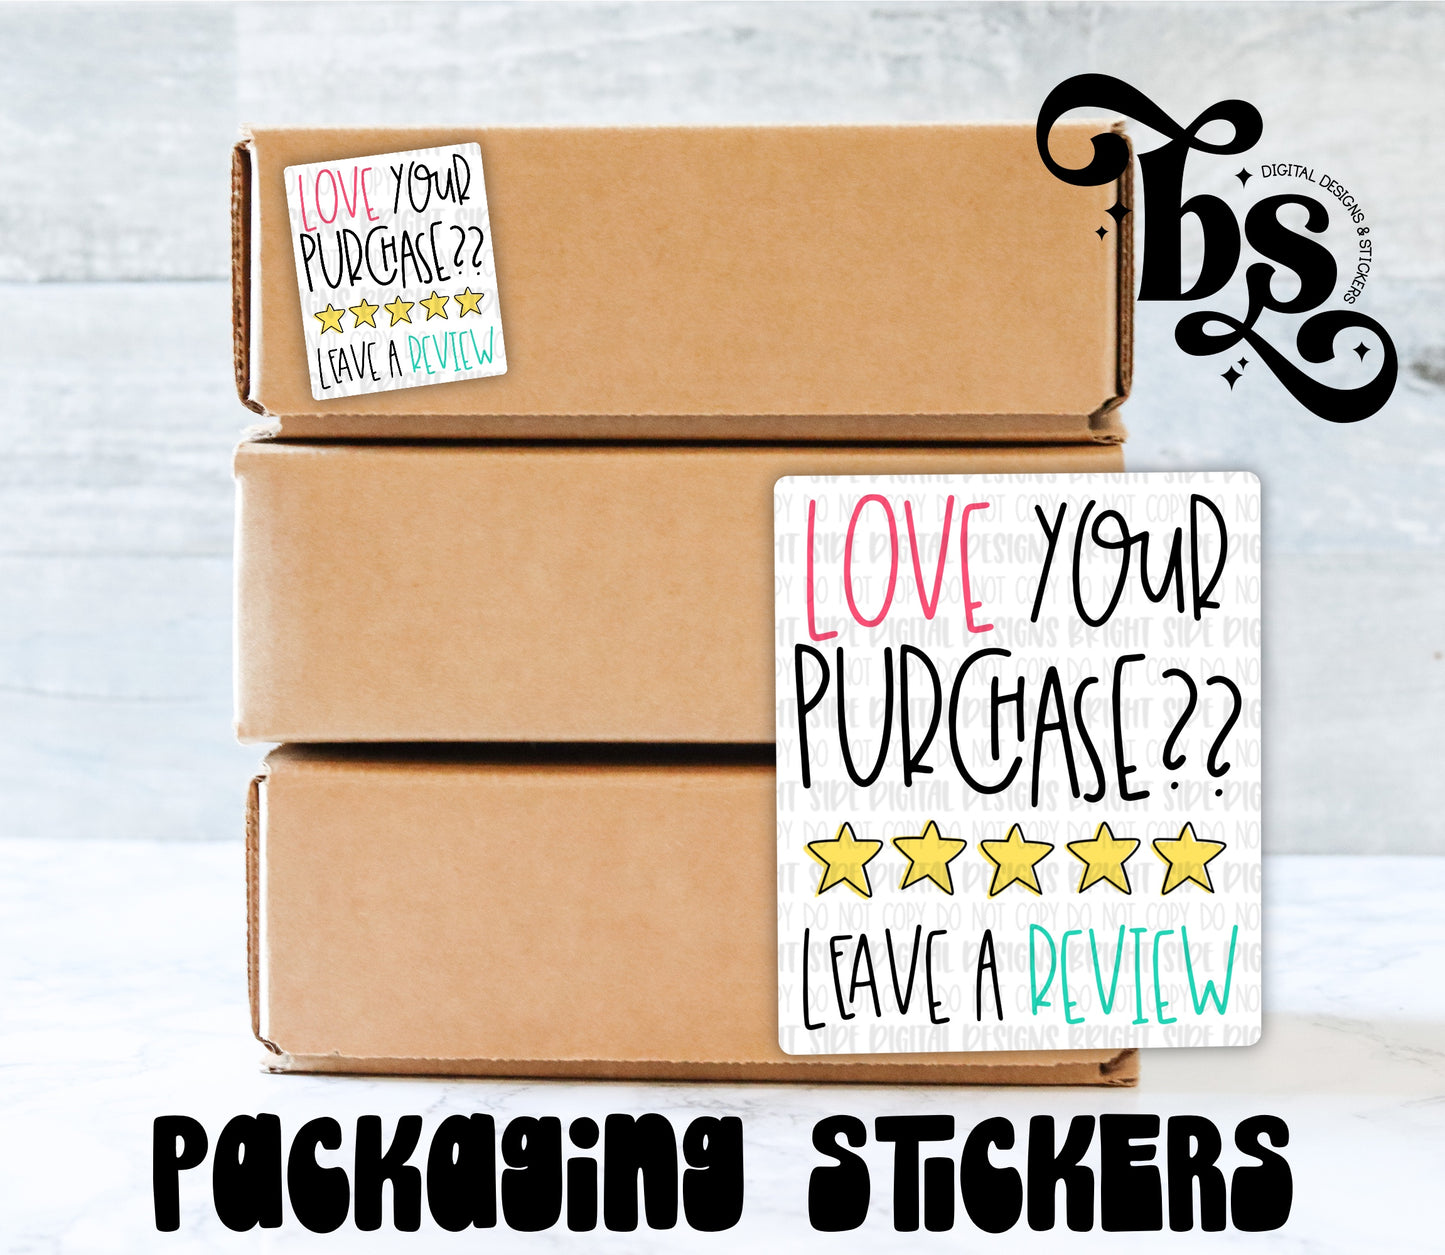 Love Your Purchase? Leave A Review Packaging Sticker